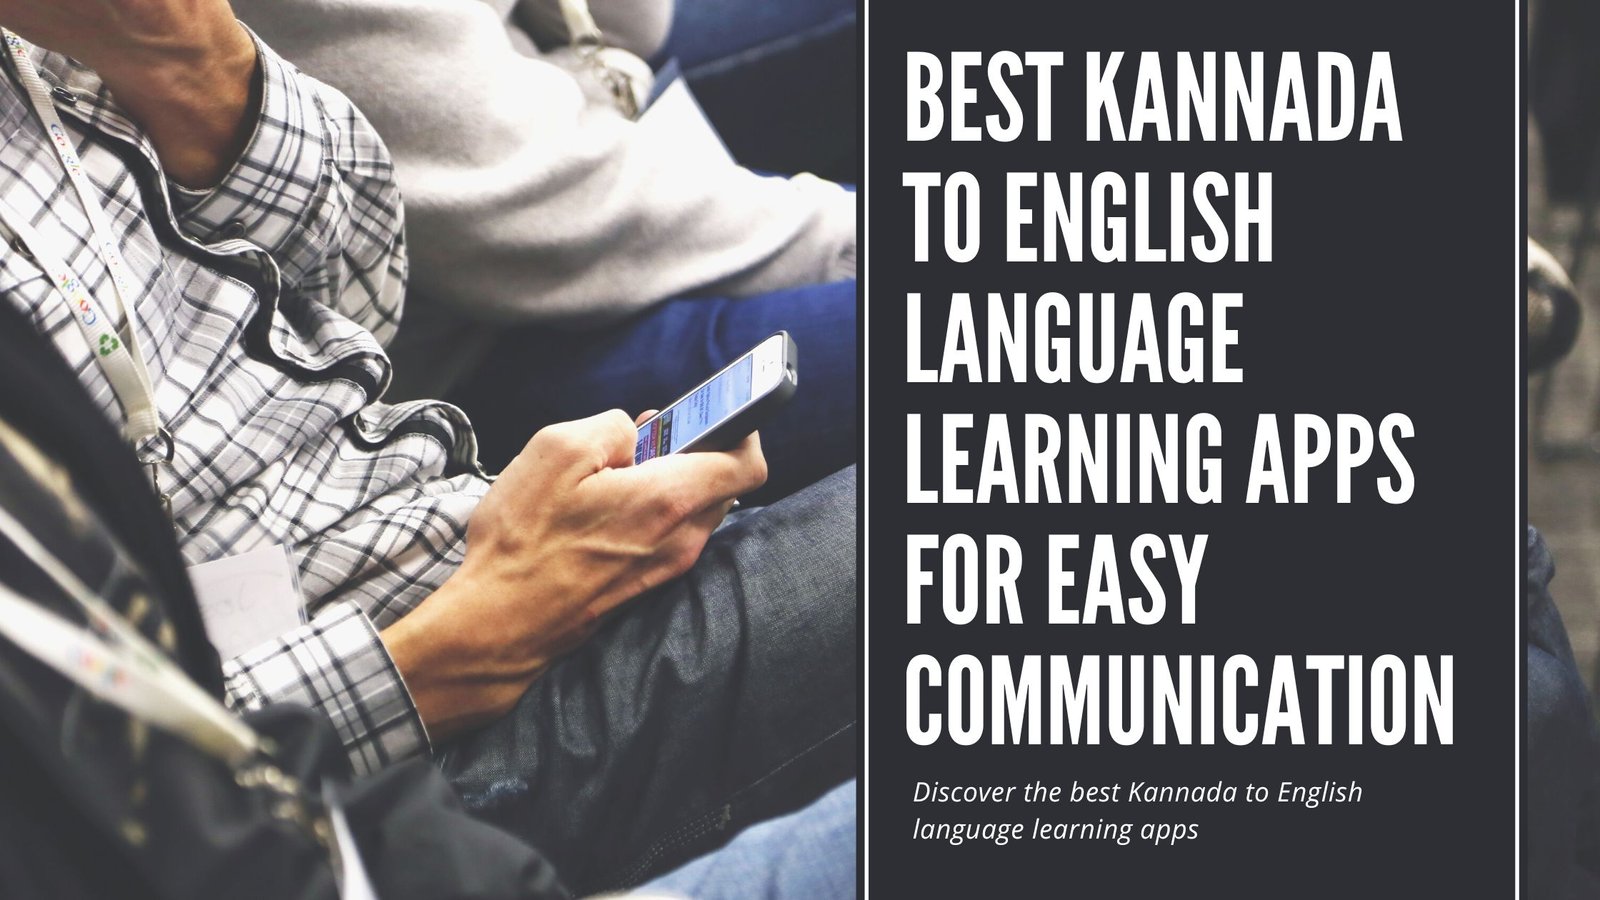 best kannada to english language learning apps for easy communication